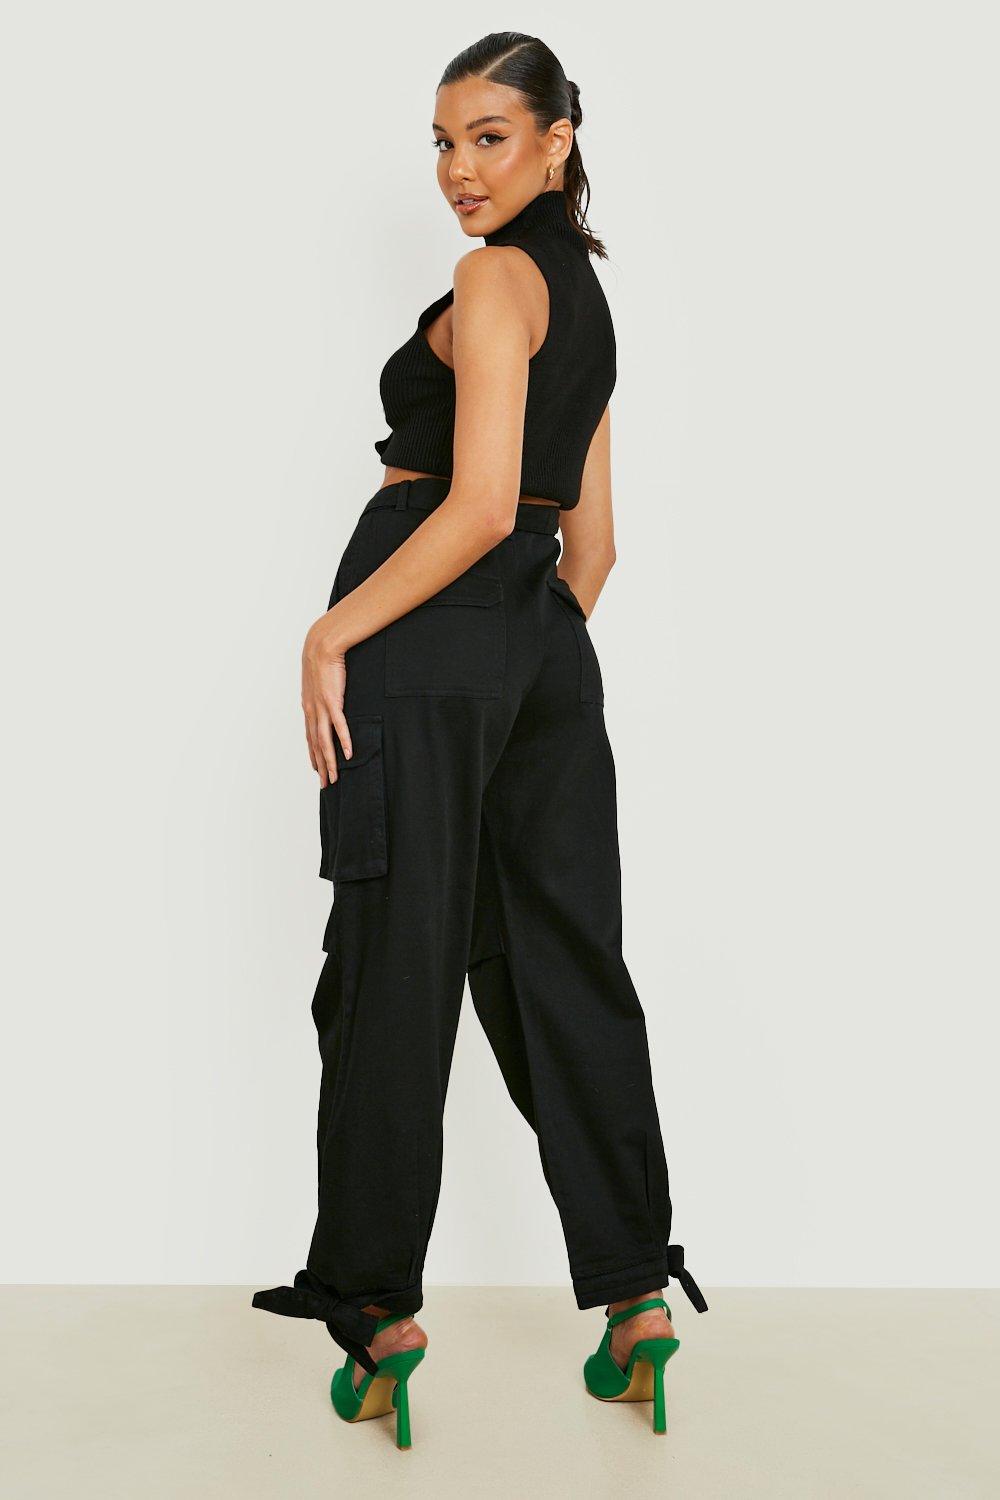 ASOS DESIGN ankle tie trousers in black